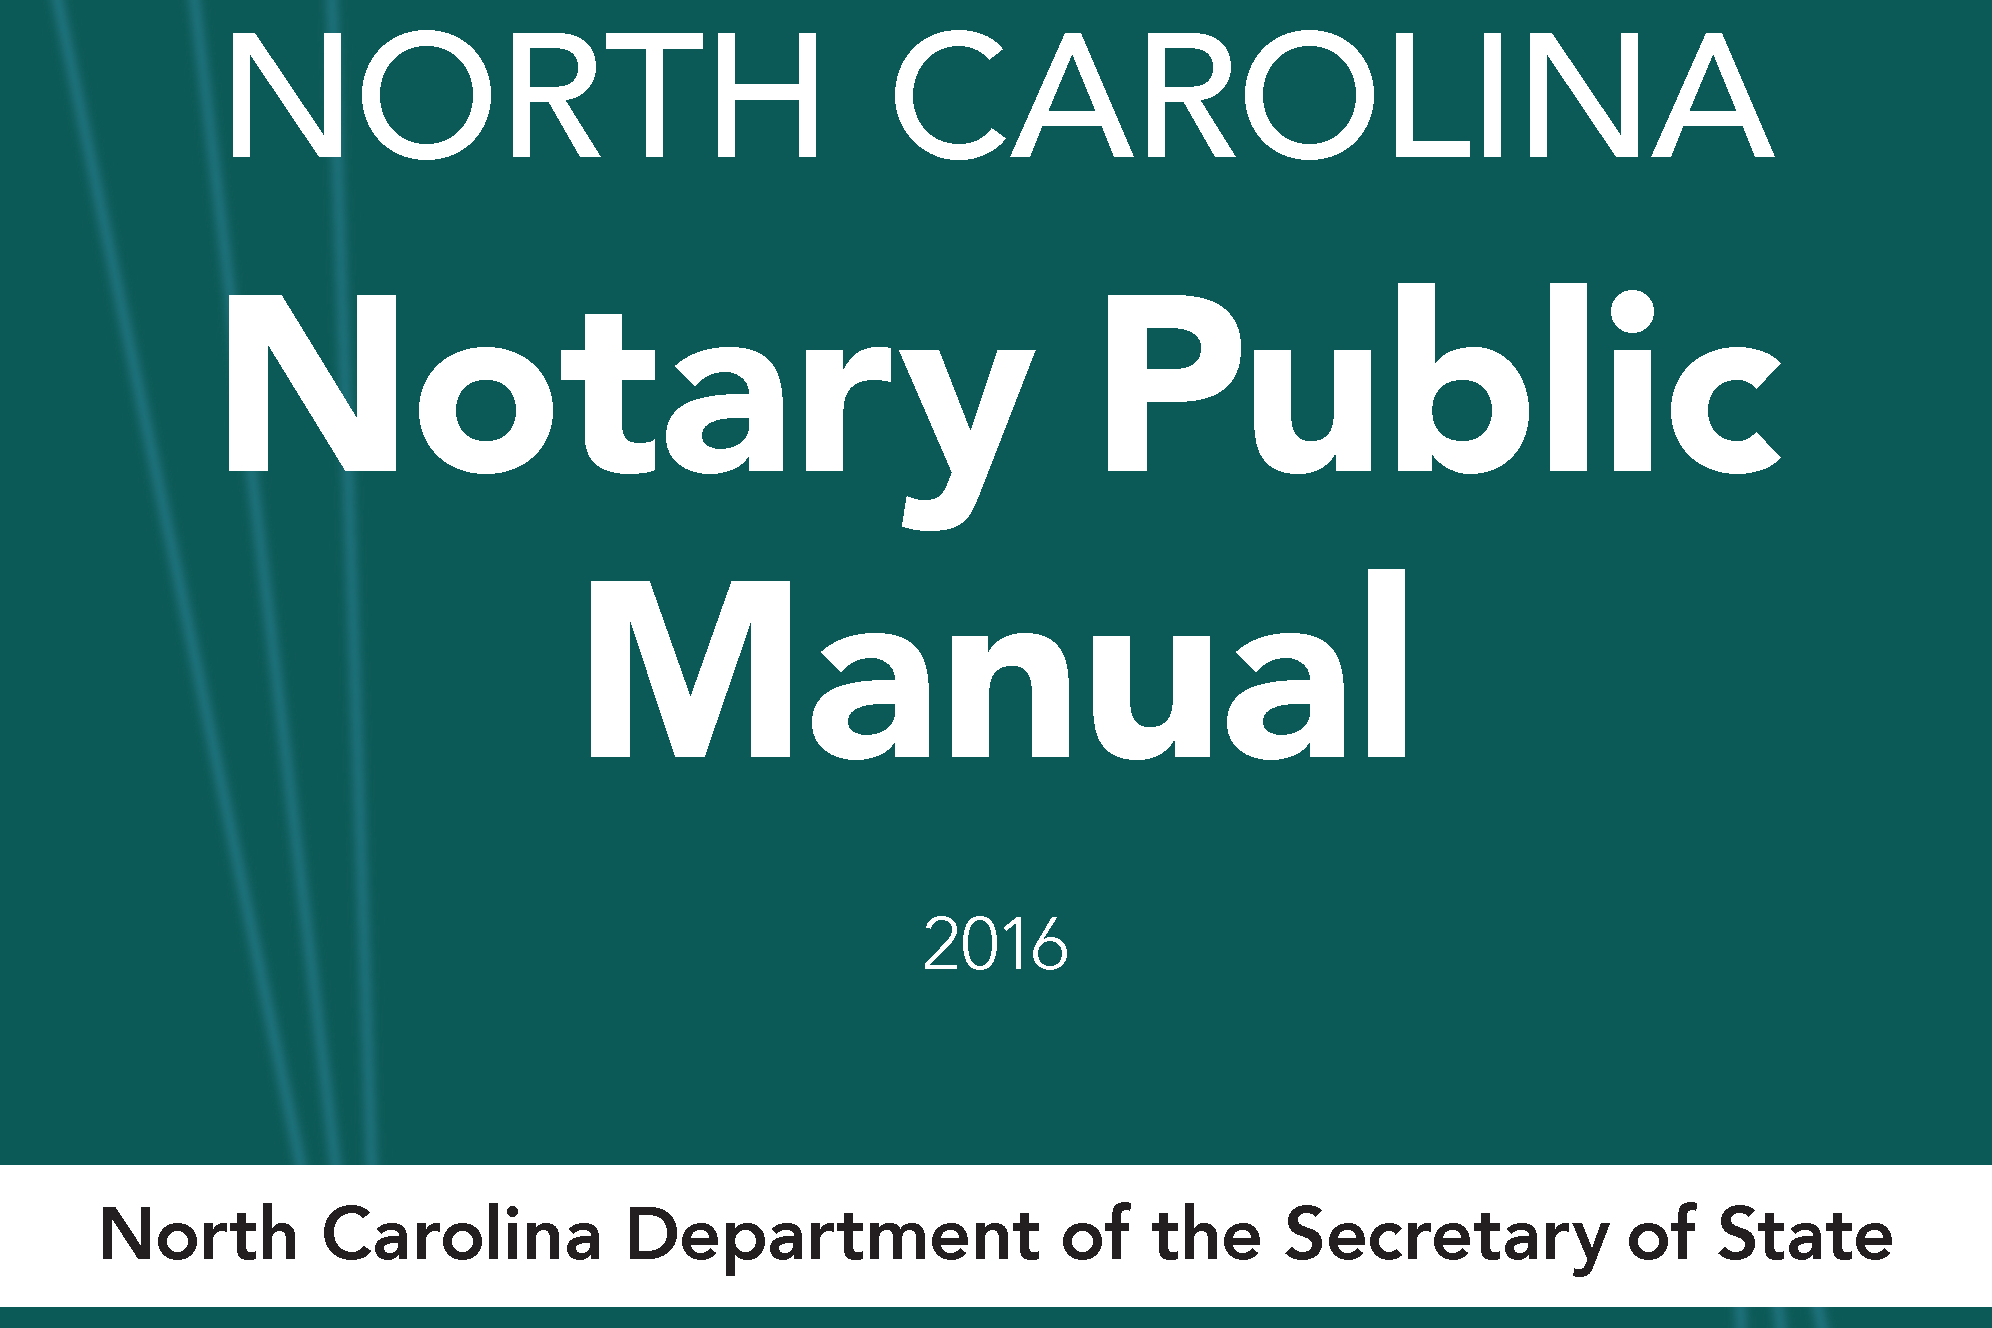 Notary Public Manual State of NC